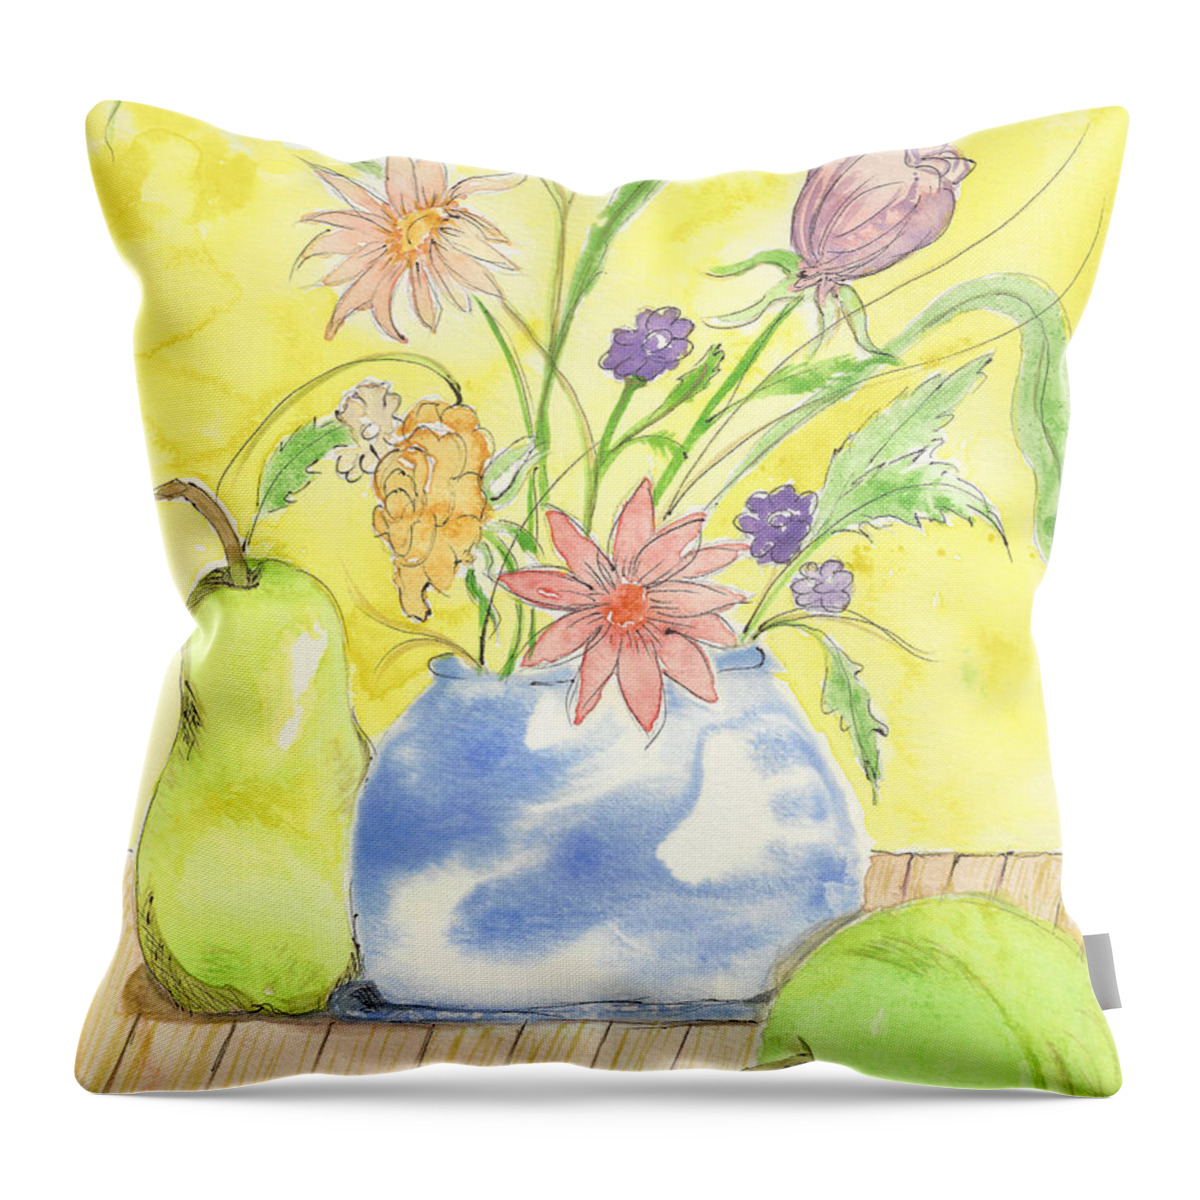 Watercolor Throw Pillow featuring the painting Spring Bouquet by Bertie Edwards